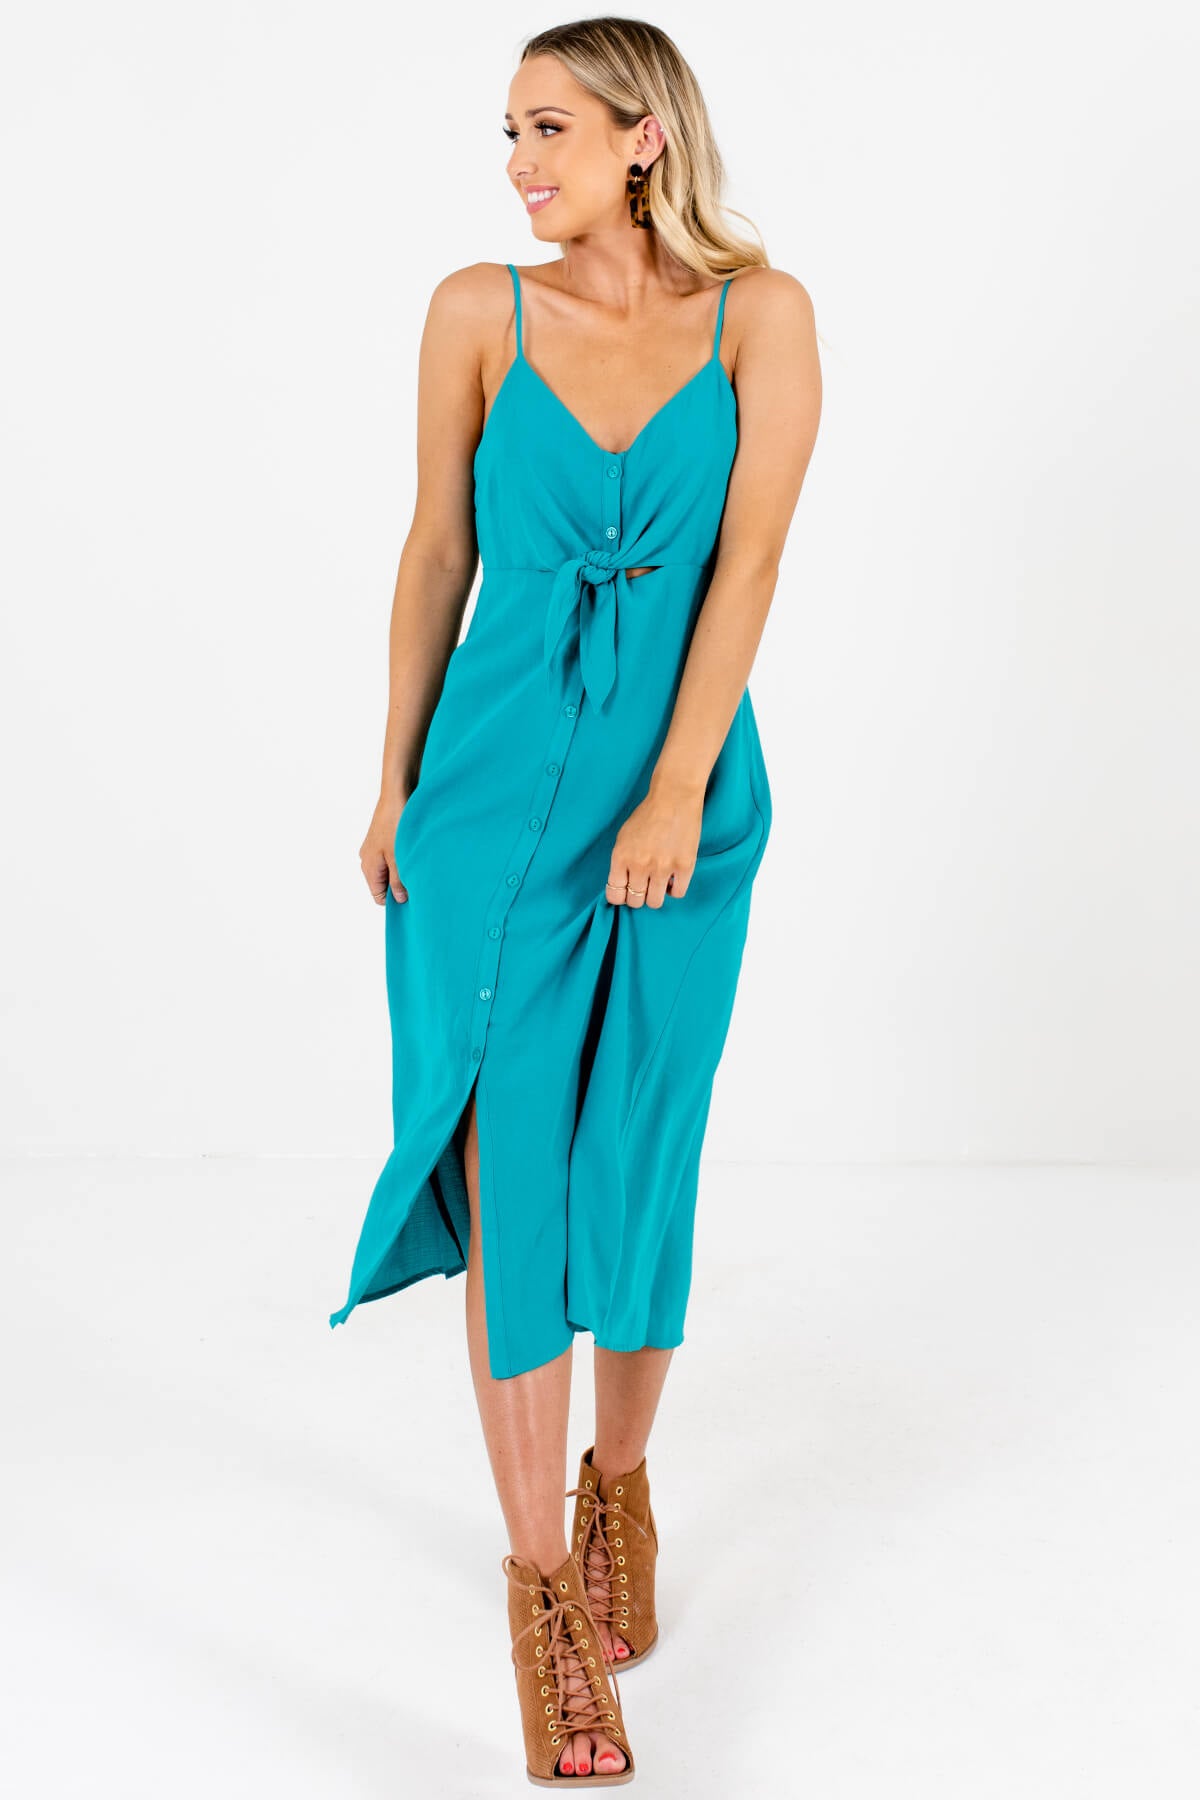 Teal Turquoise Button-Up Tie-Front Midi Dresses for Women